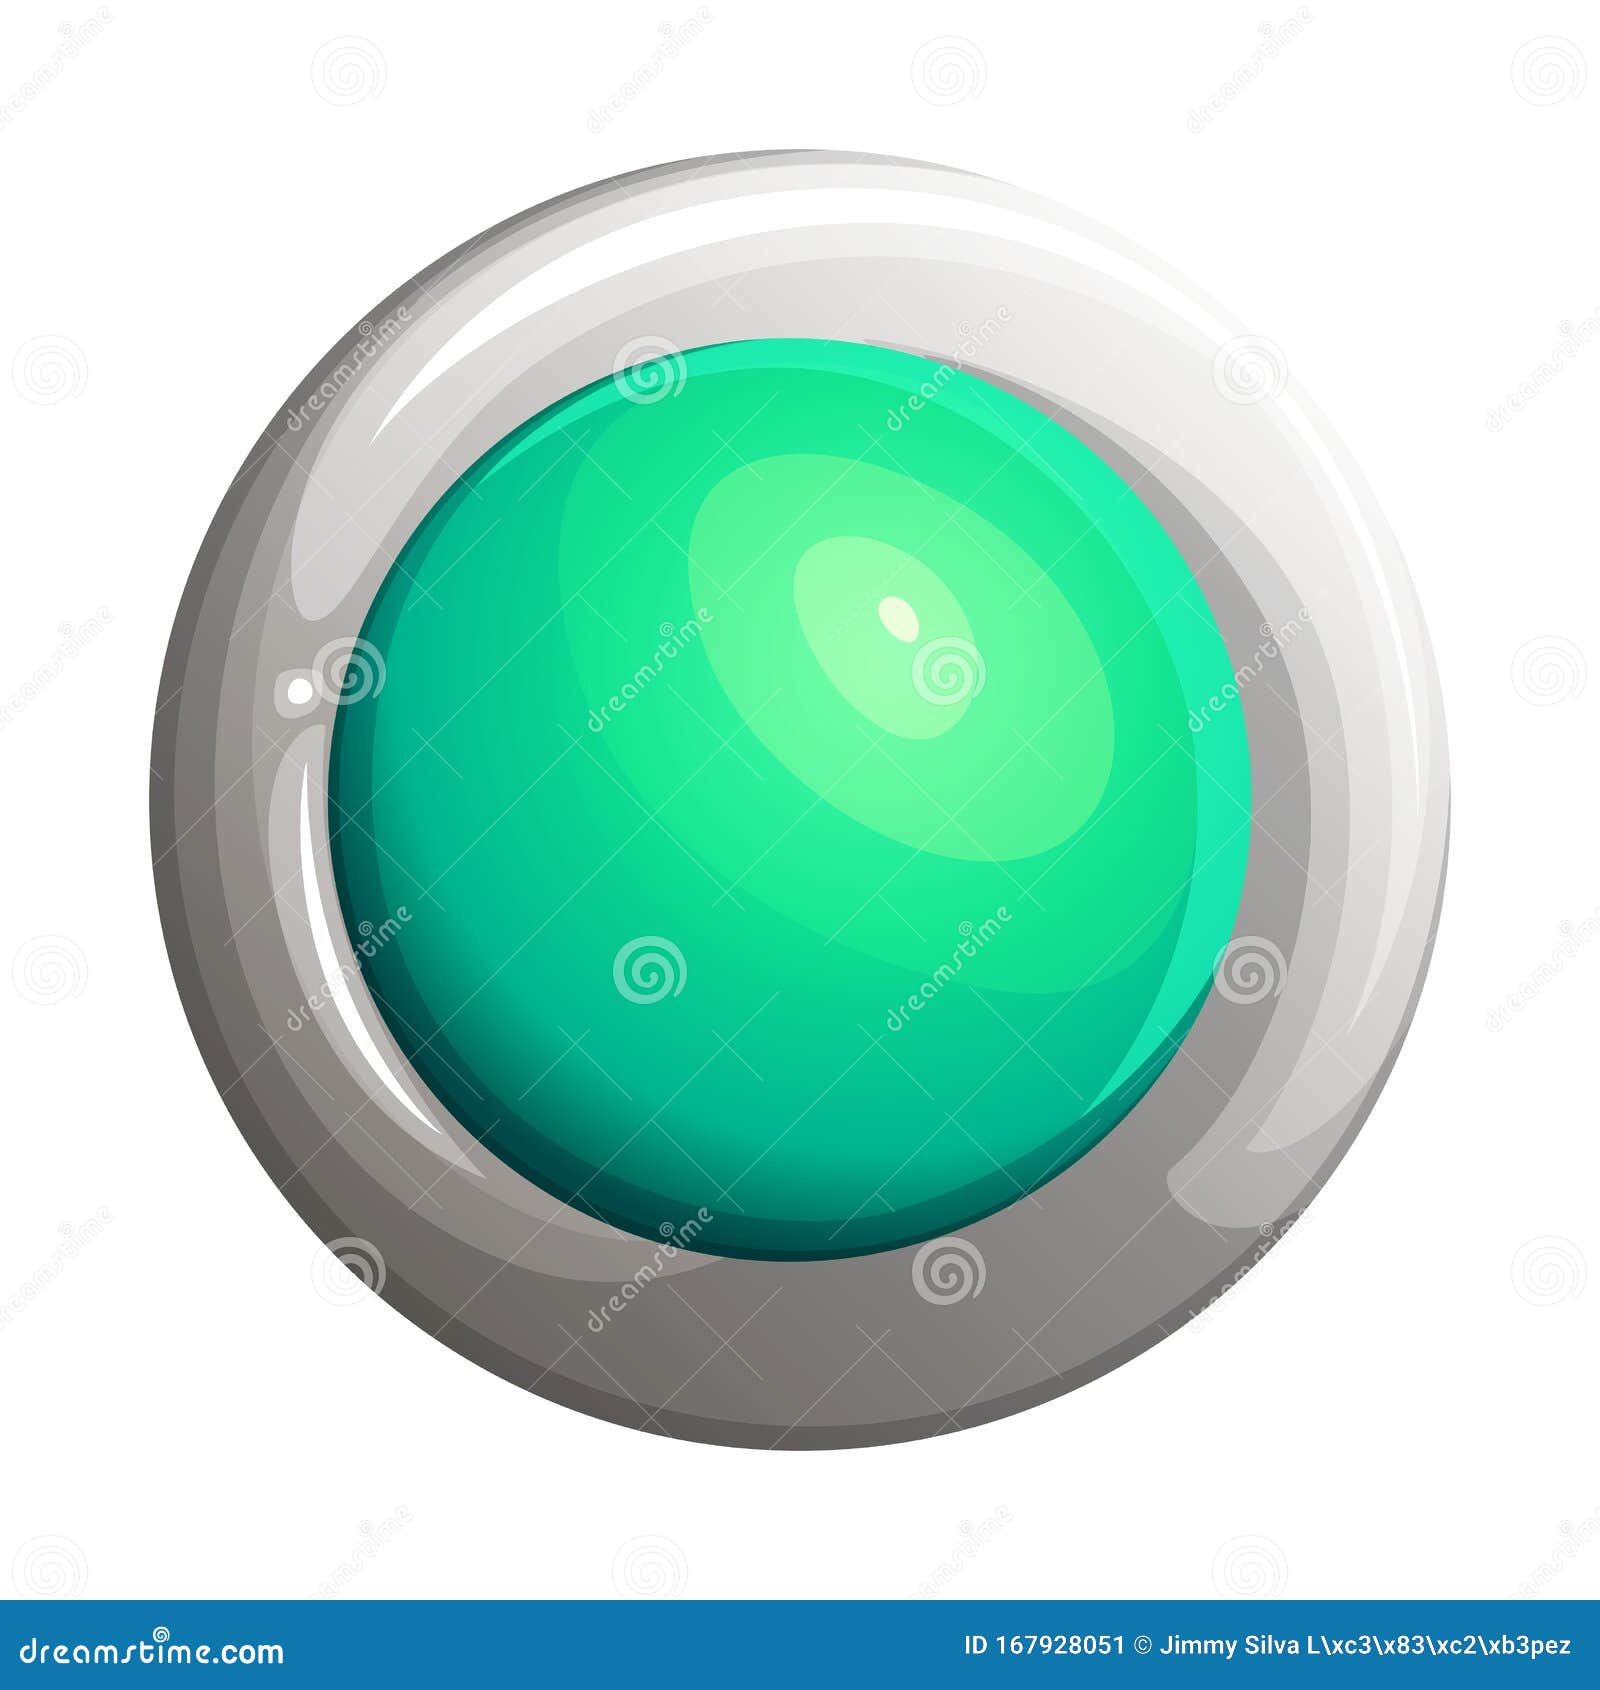 circular icon type button for multiple uses